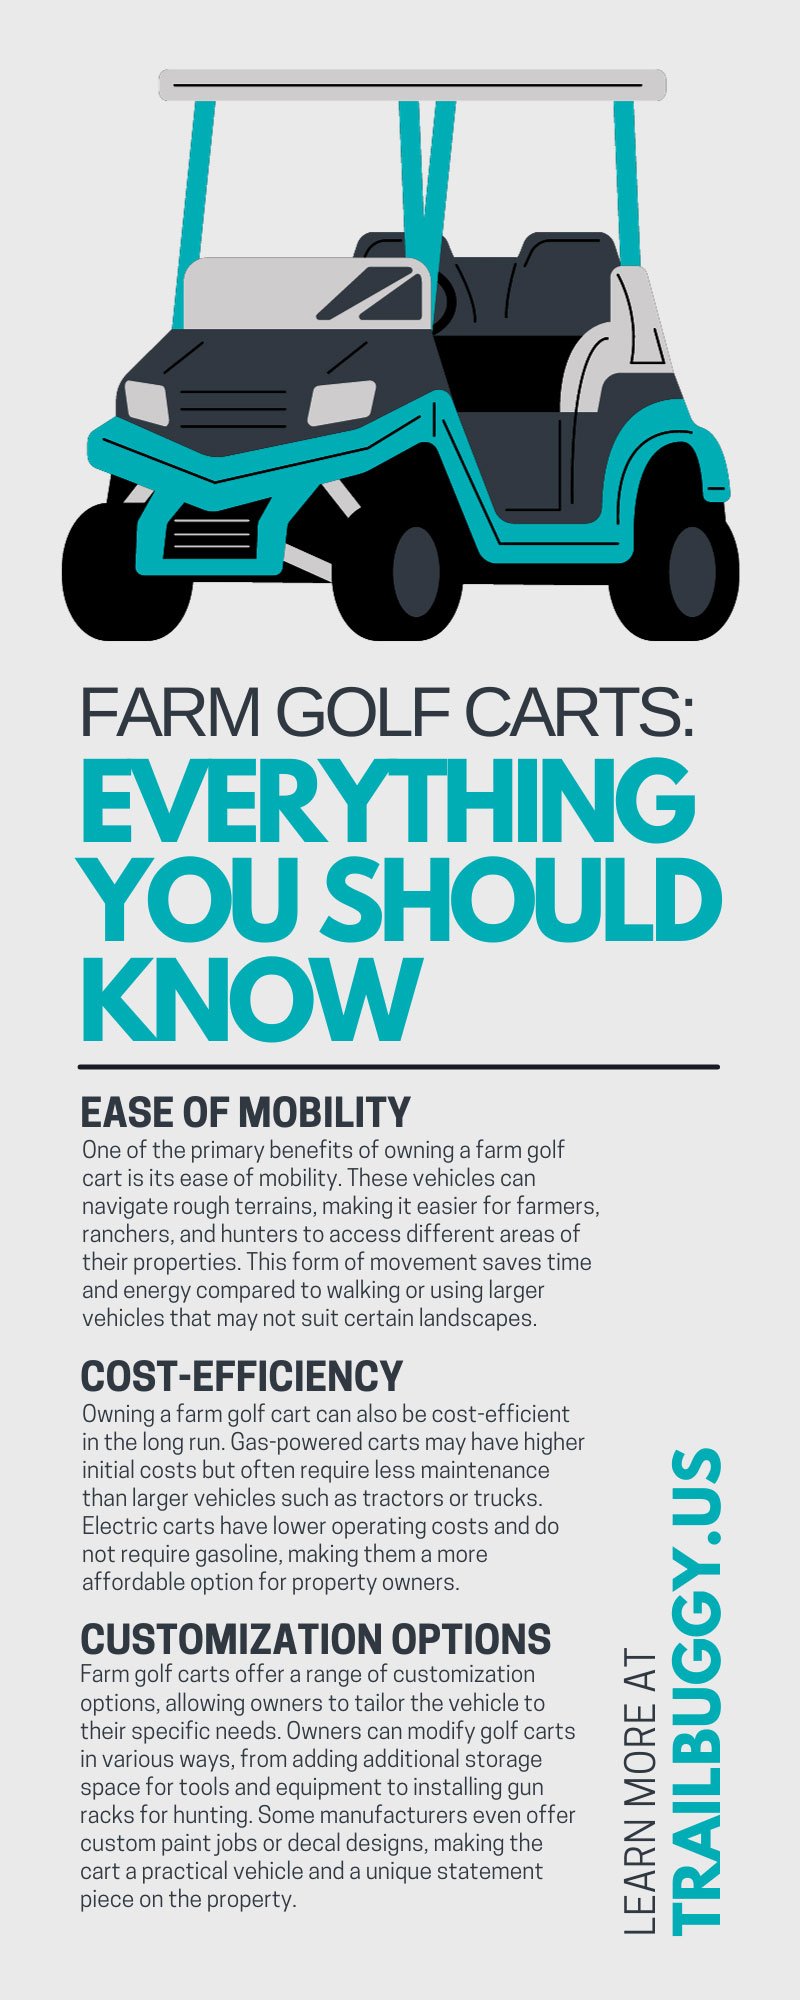 Farm Golf Carts: Everything You Should Know